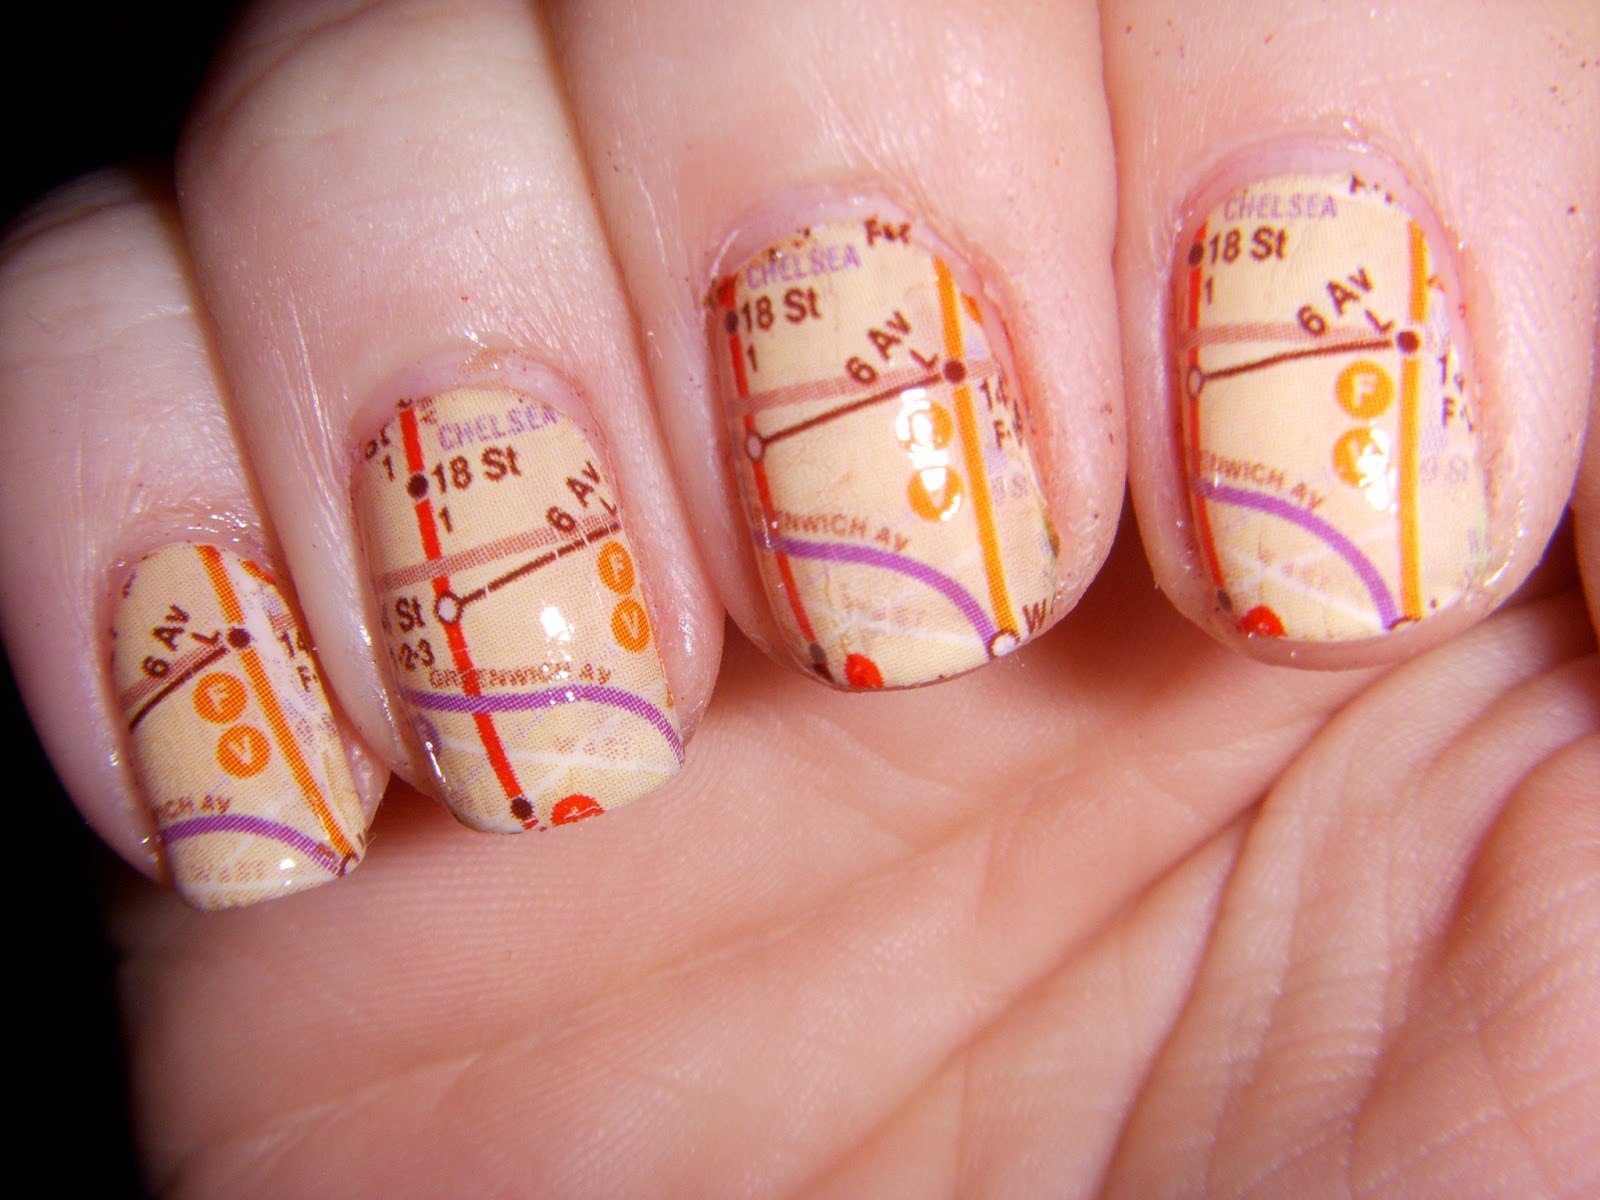 6. Map Nail Art Tutorial for Short Nails - wide 4